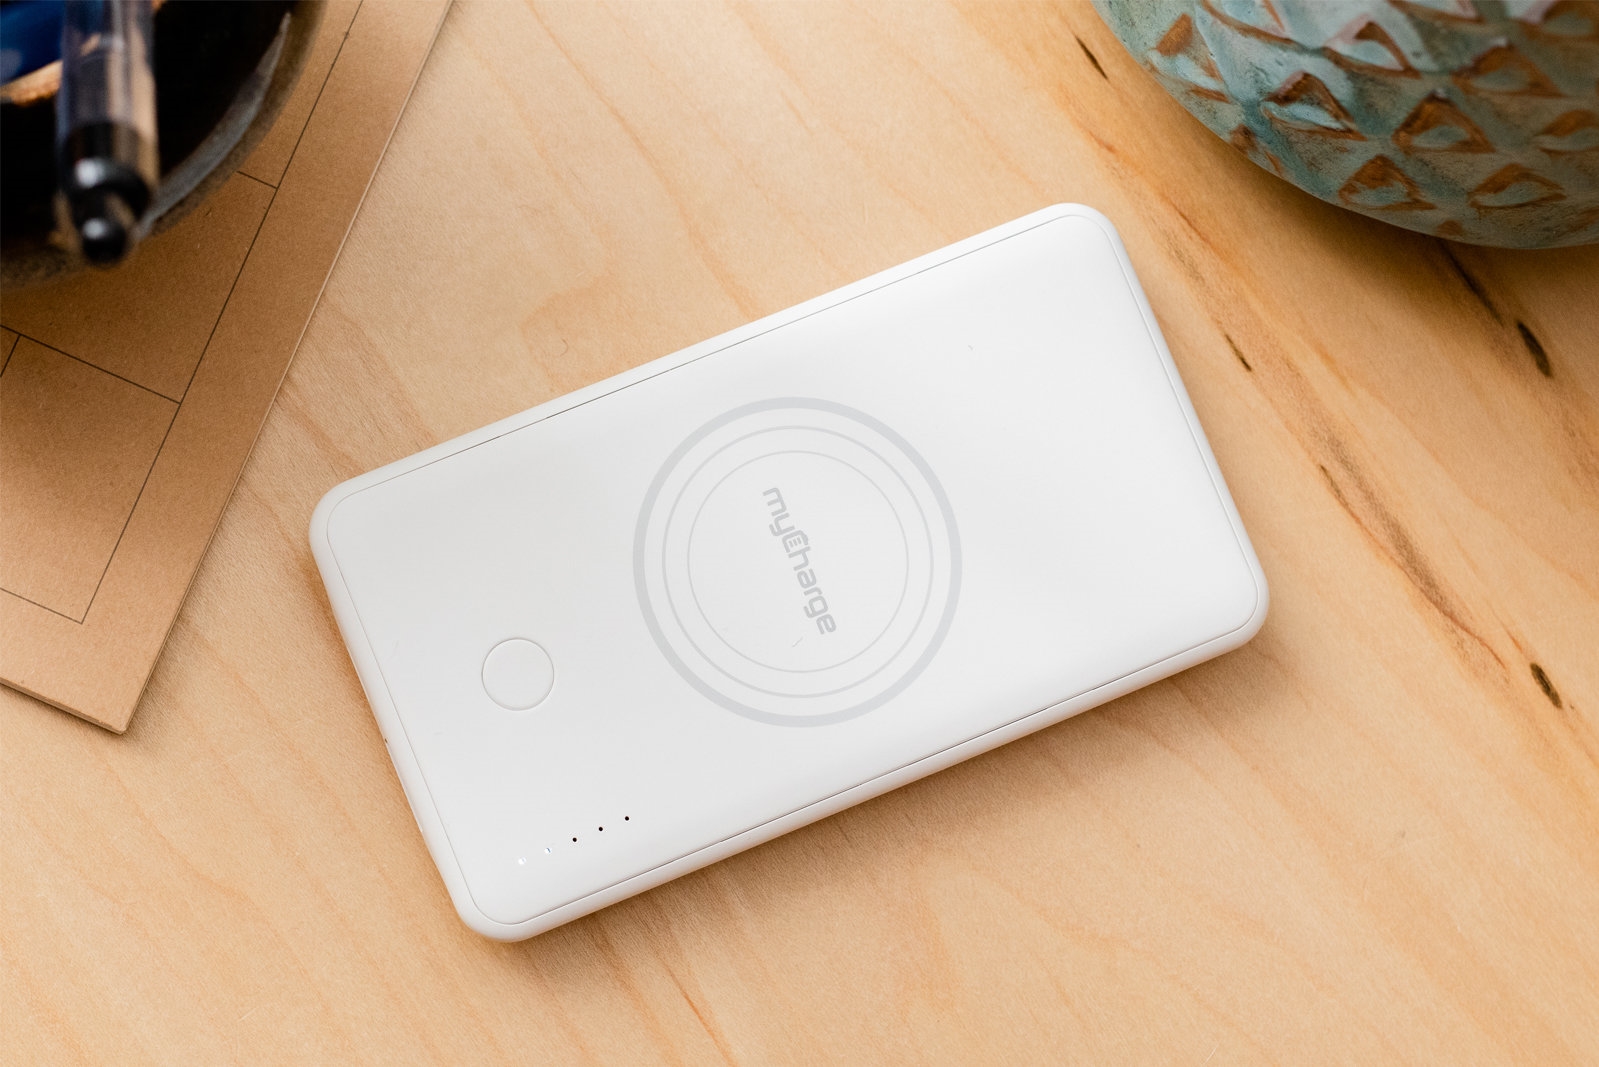 The best Qi wireless charging power banks | DeviceDaily.com